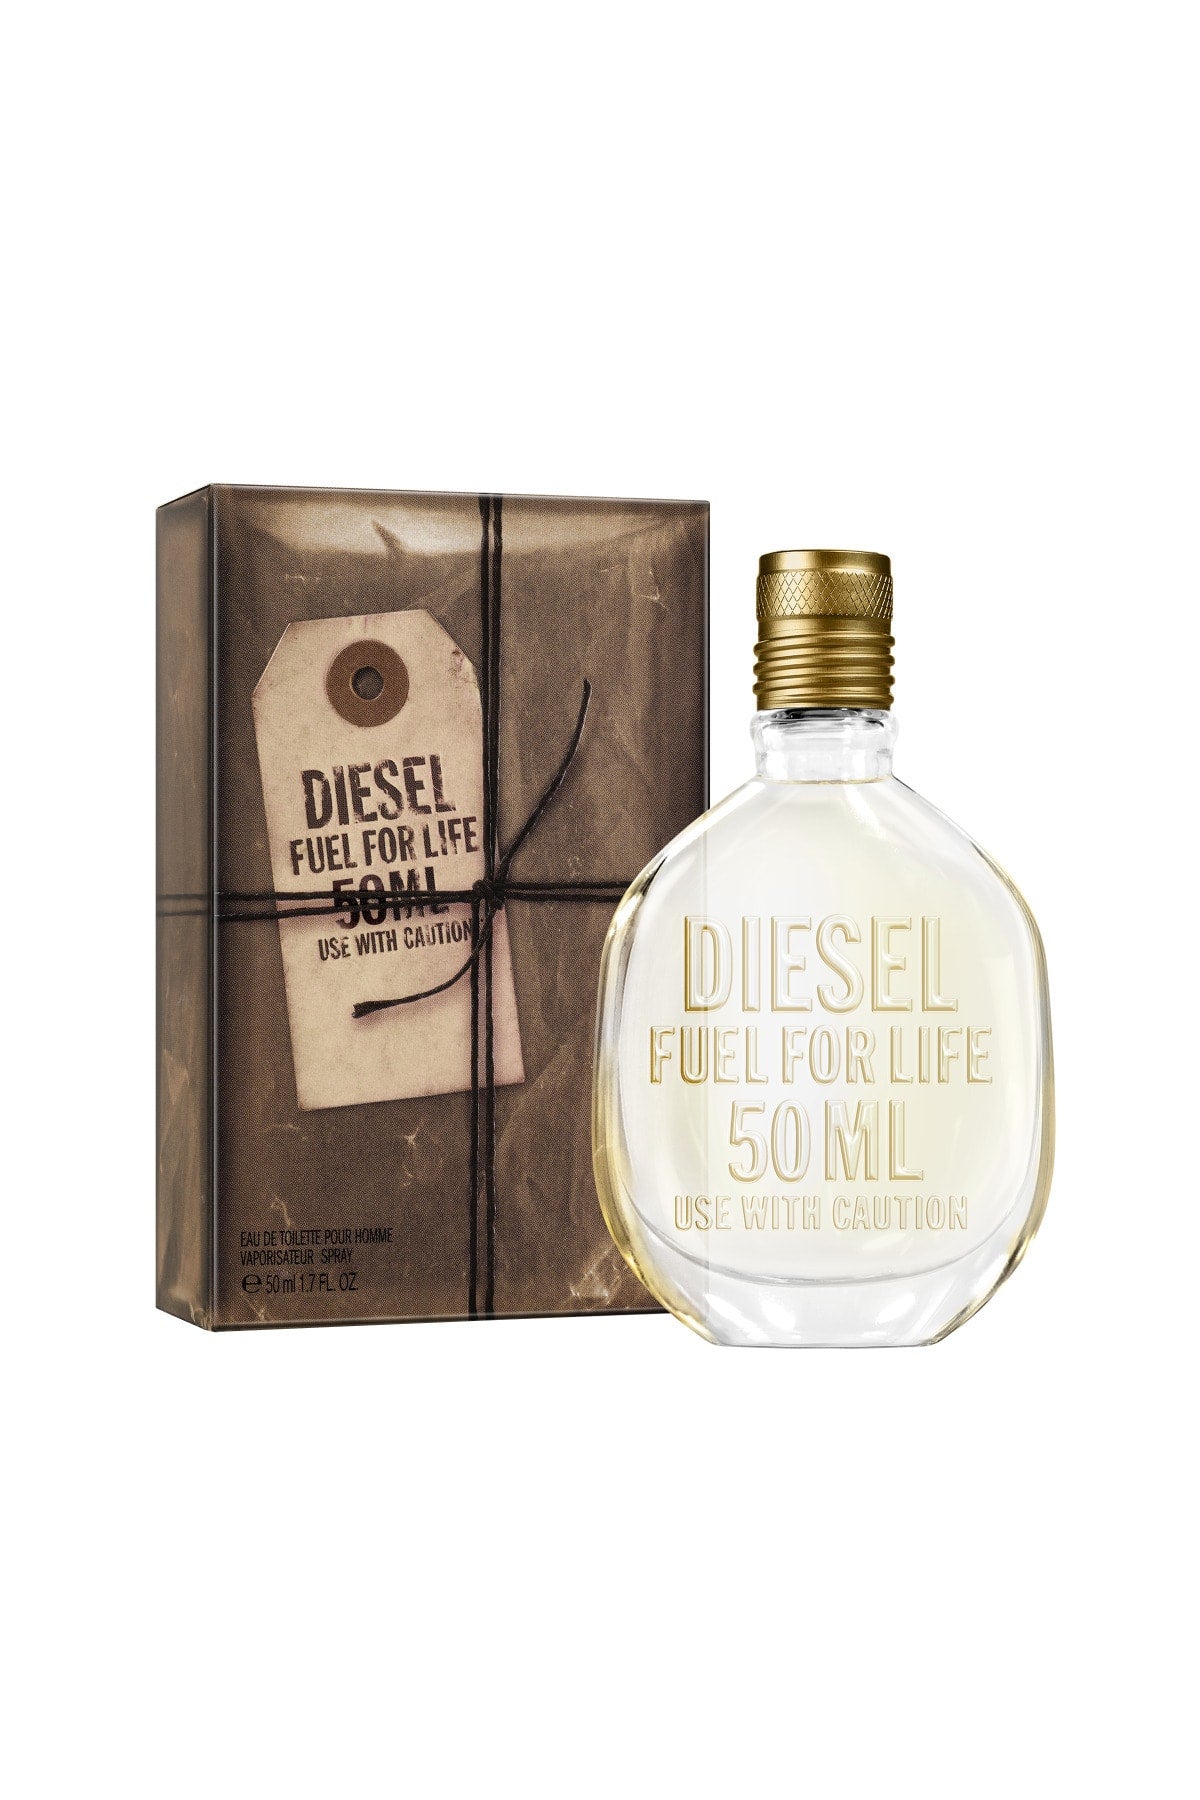 Diesel Fuel For Life M 50ml Boxed